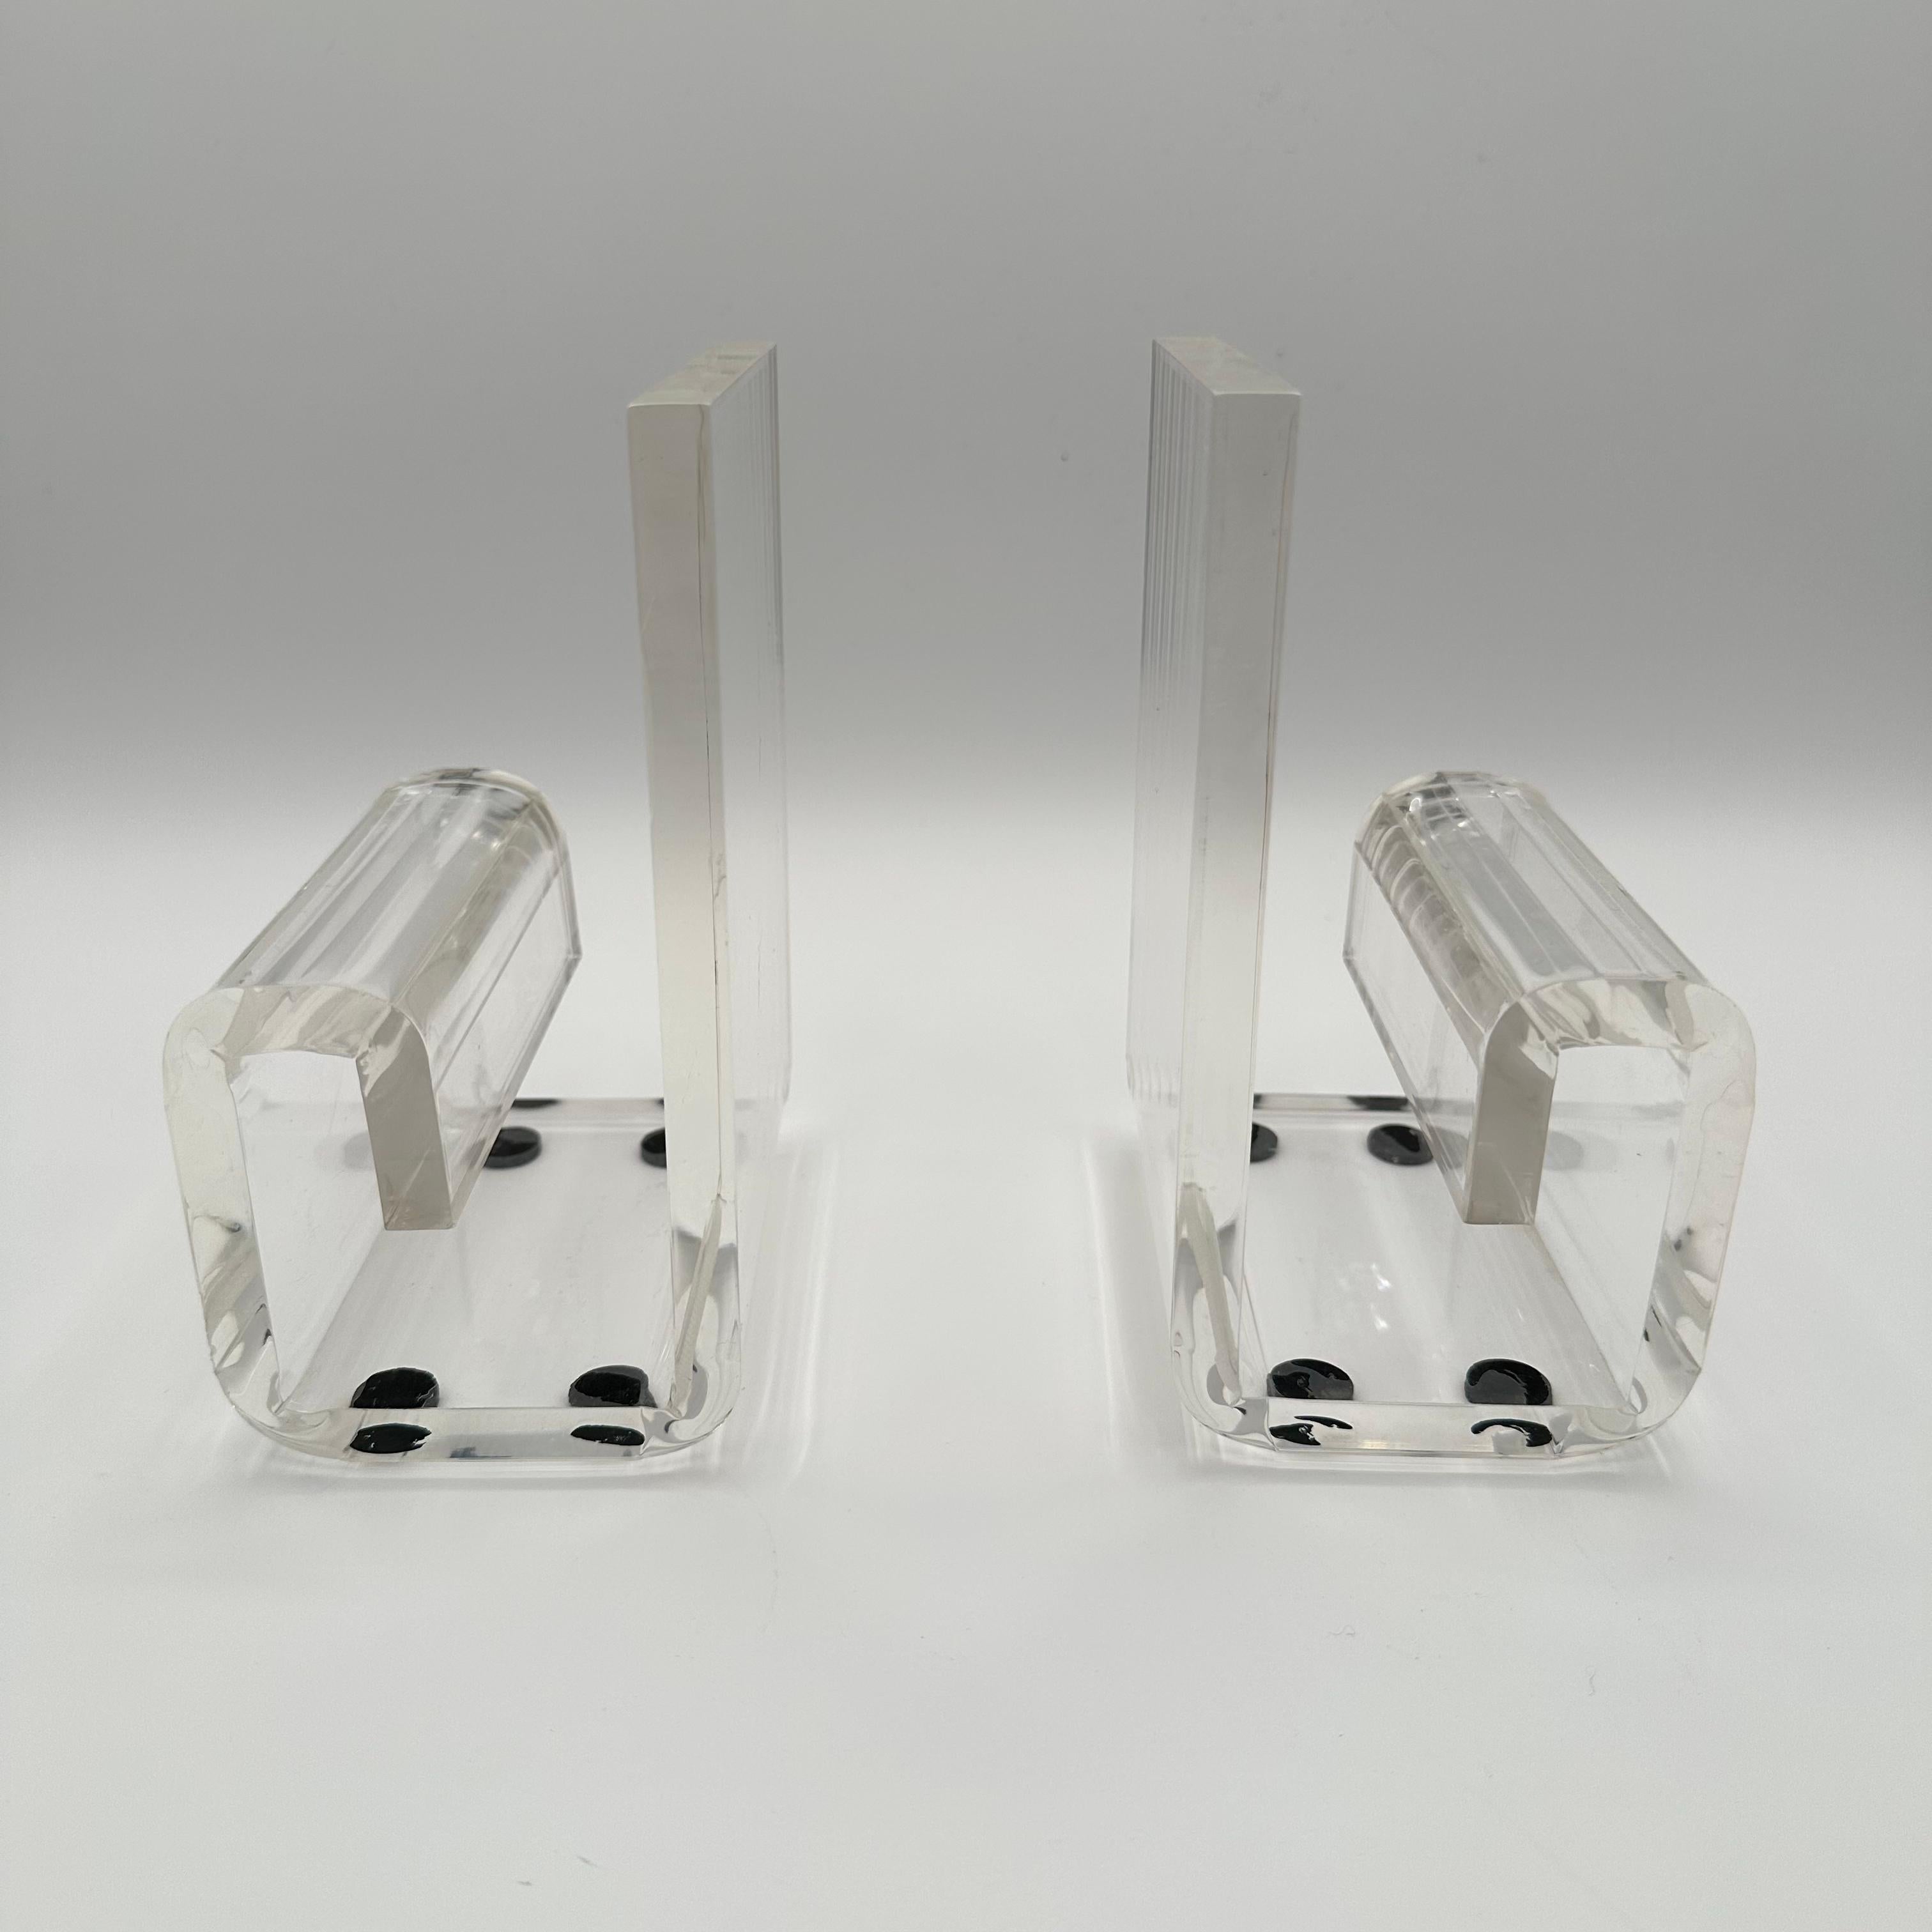 A pair of vintage lucite bookends with a chunky, curving, bracket shape, similar to the number 